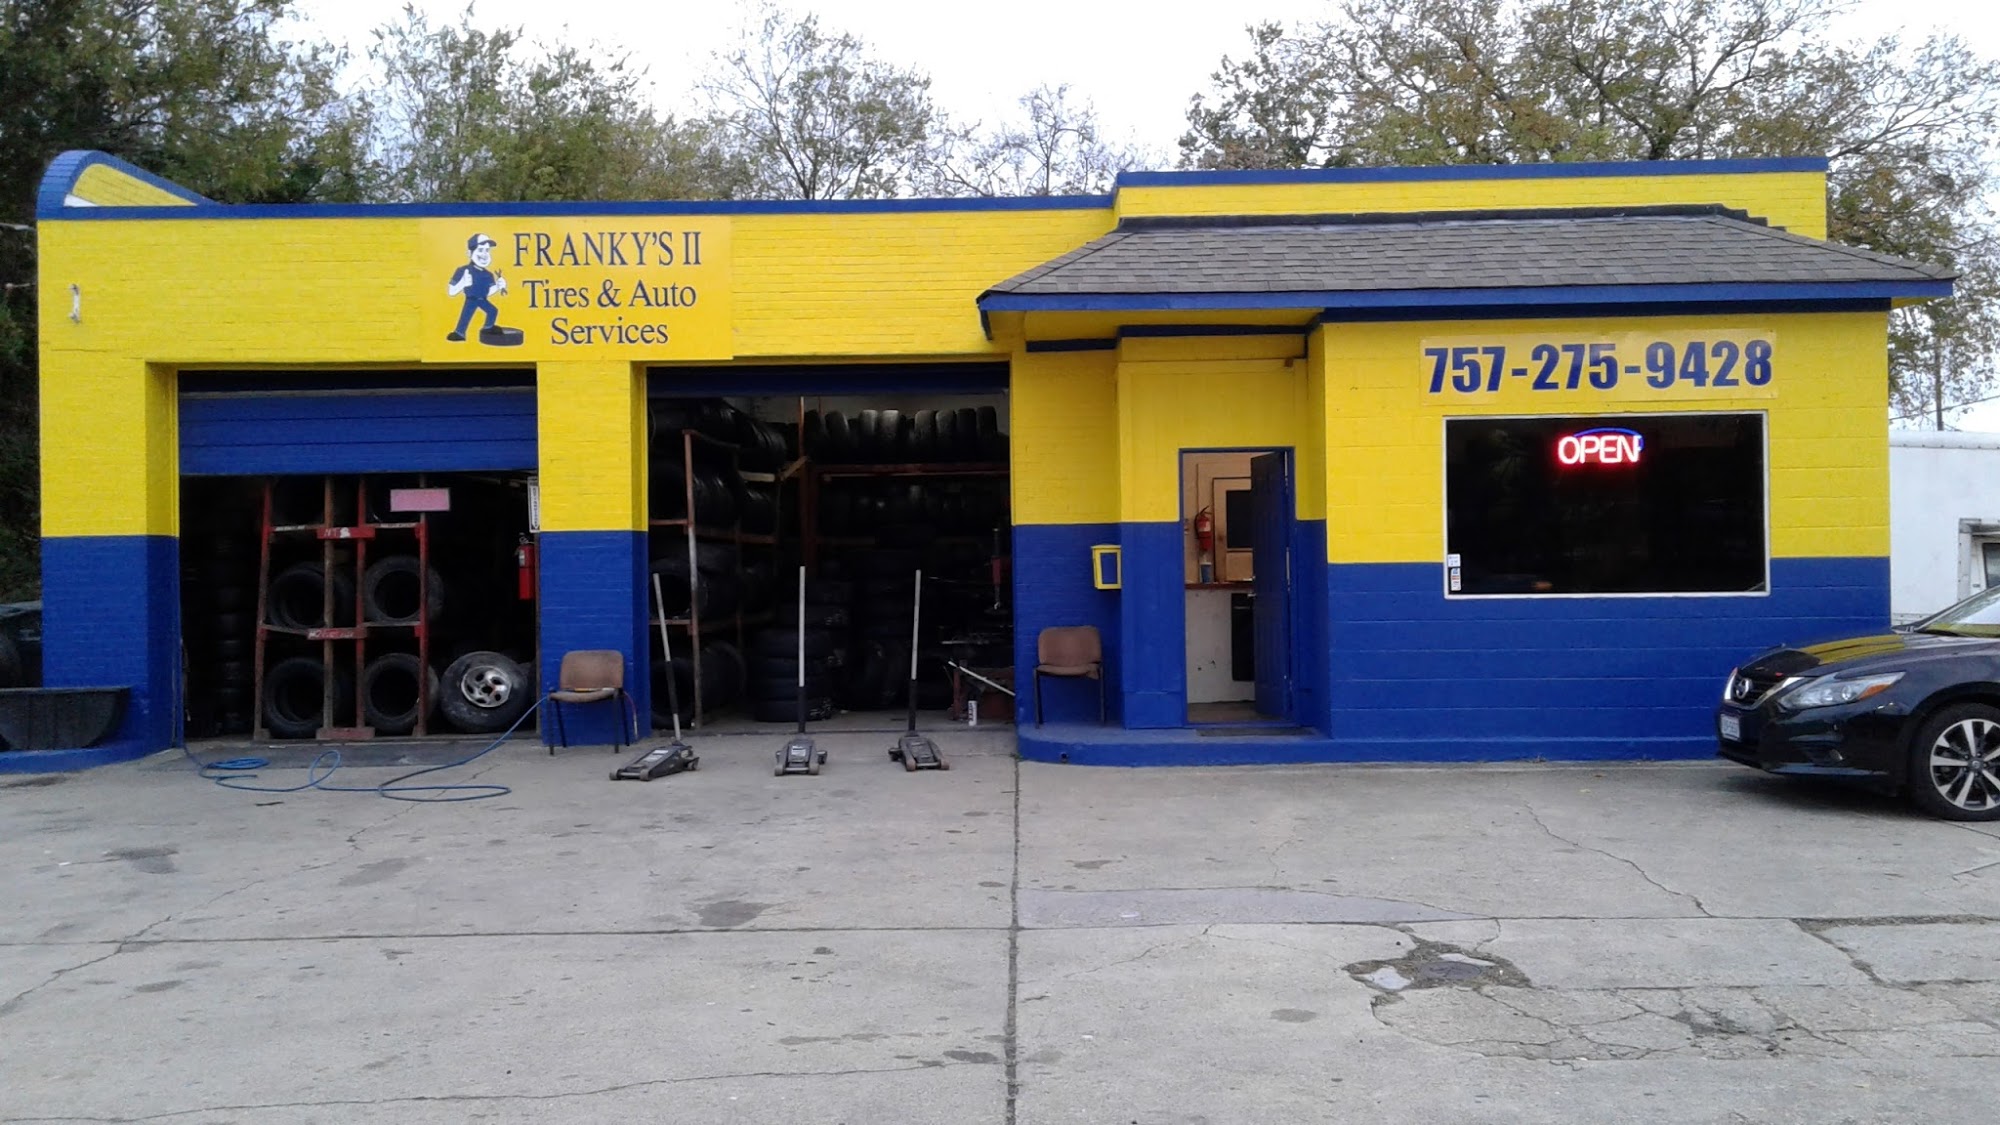 Franky's II Tires and Auto Services